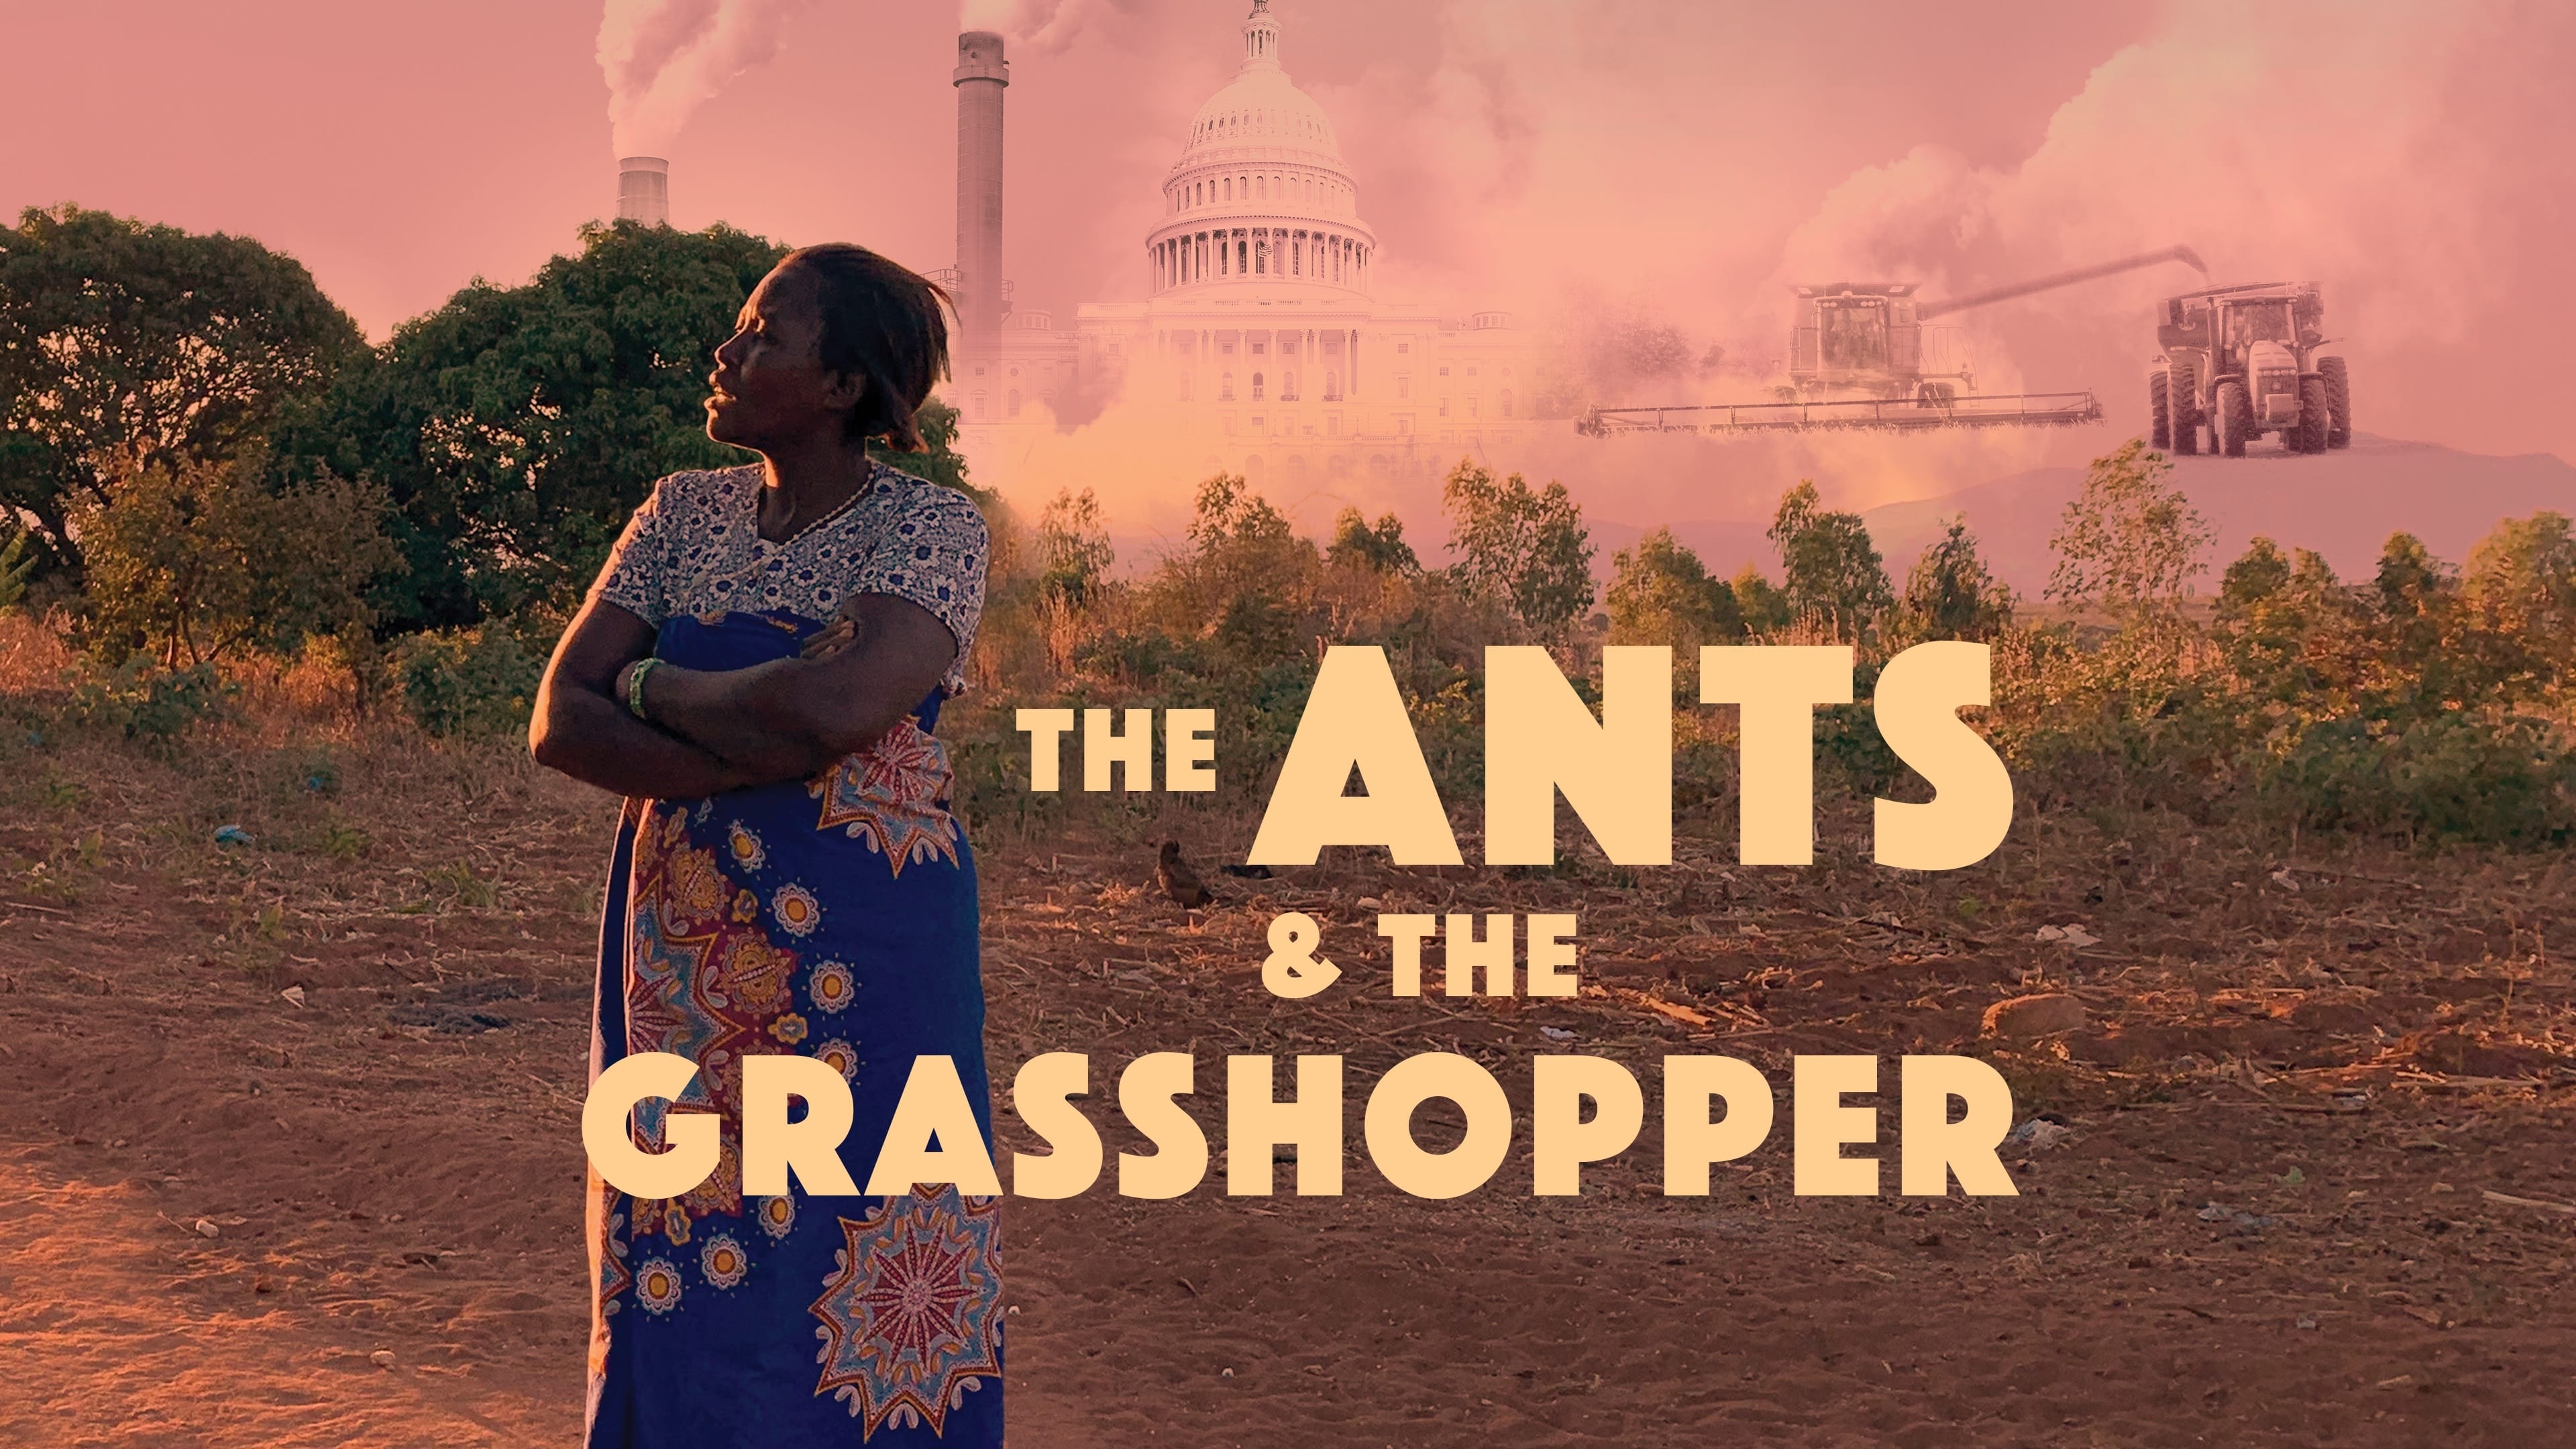 The Ants and the Grasshopper (2021)